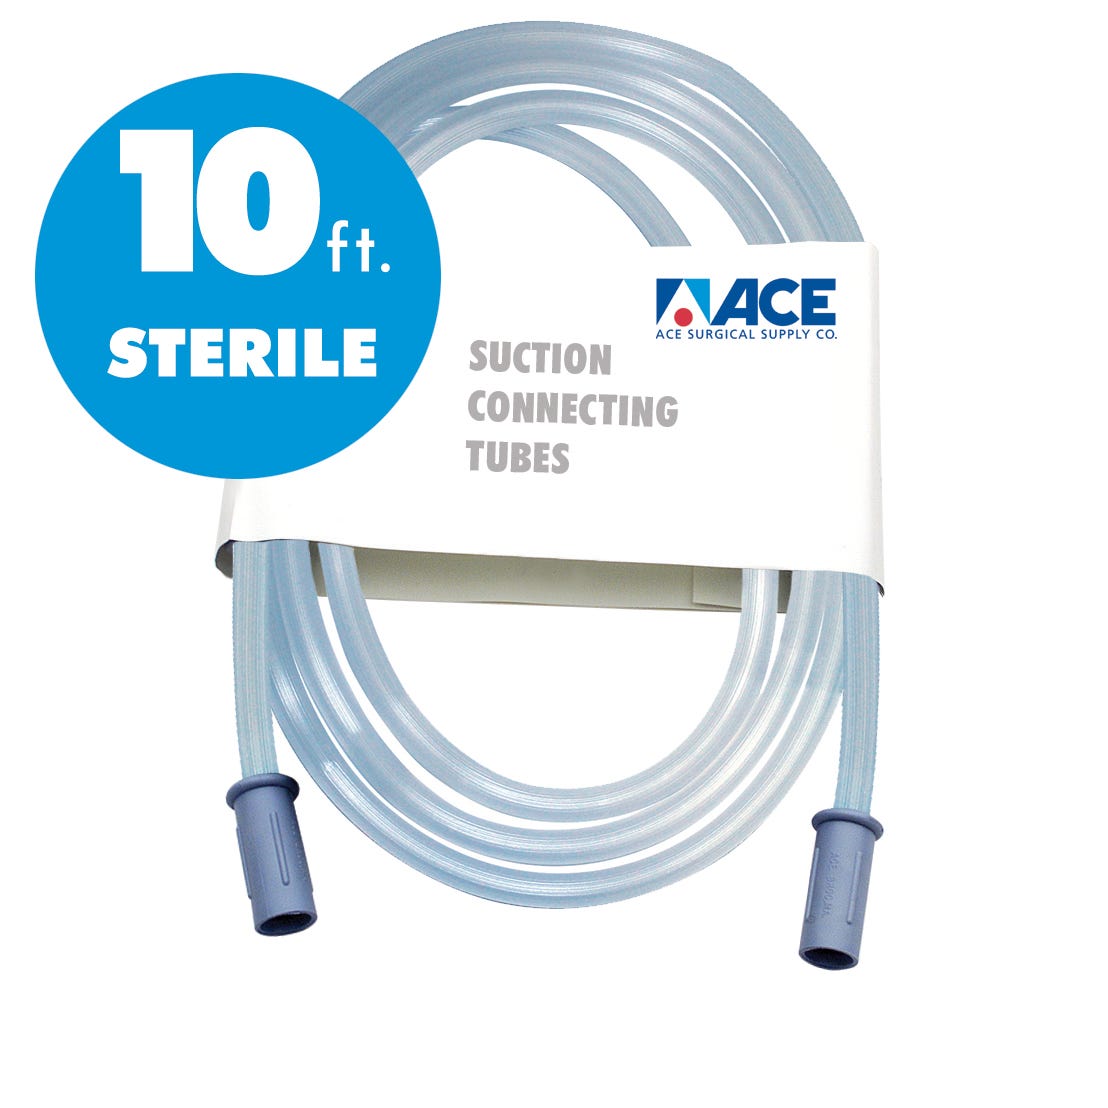 ACE Suction Connection Tubing Sterile - Clear with Blue Tint, 10' long, 1/4" I.D. -20/Case